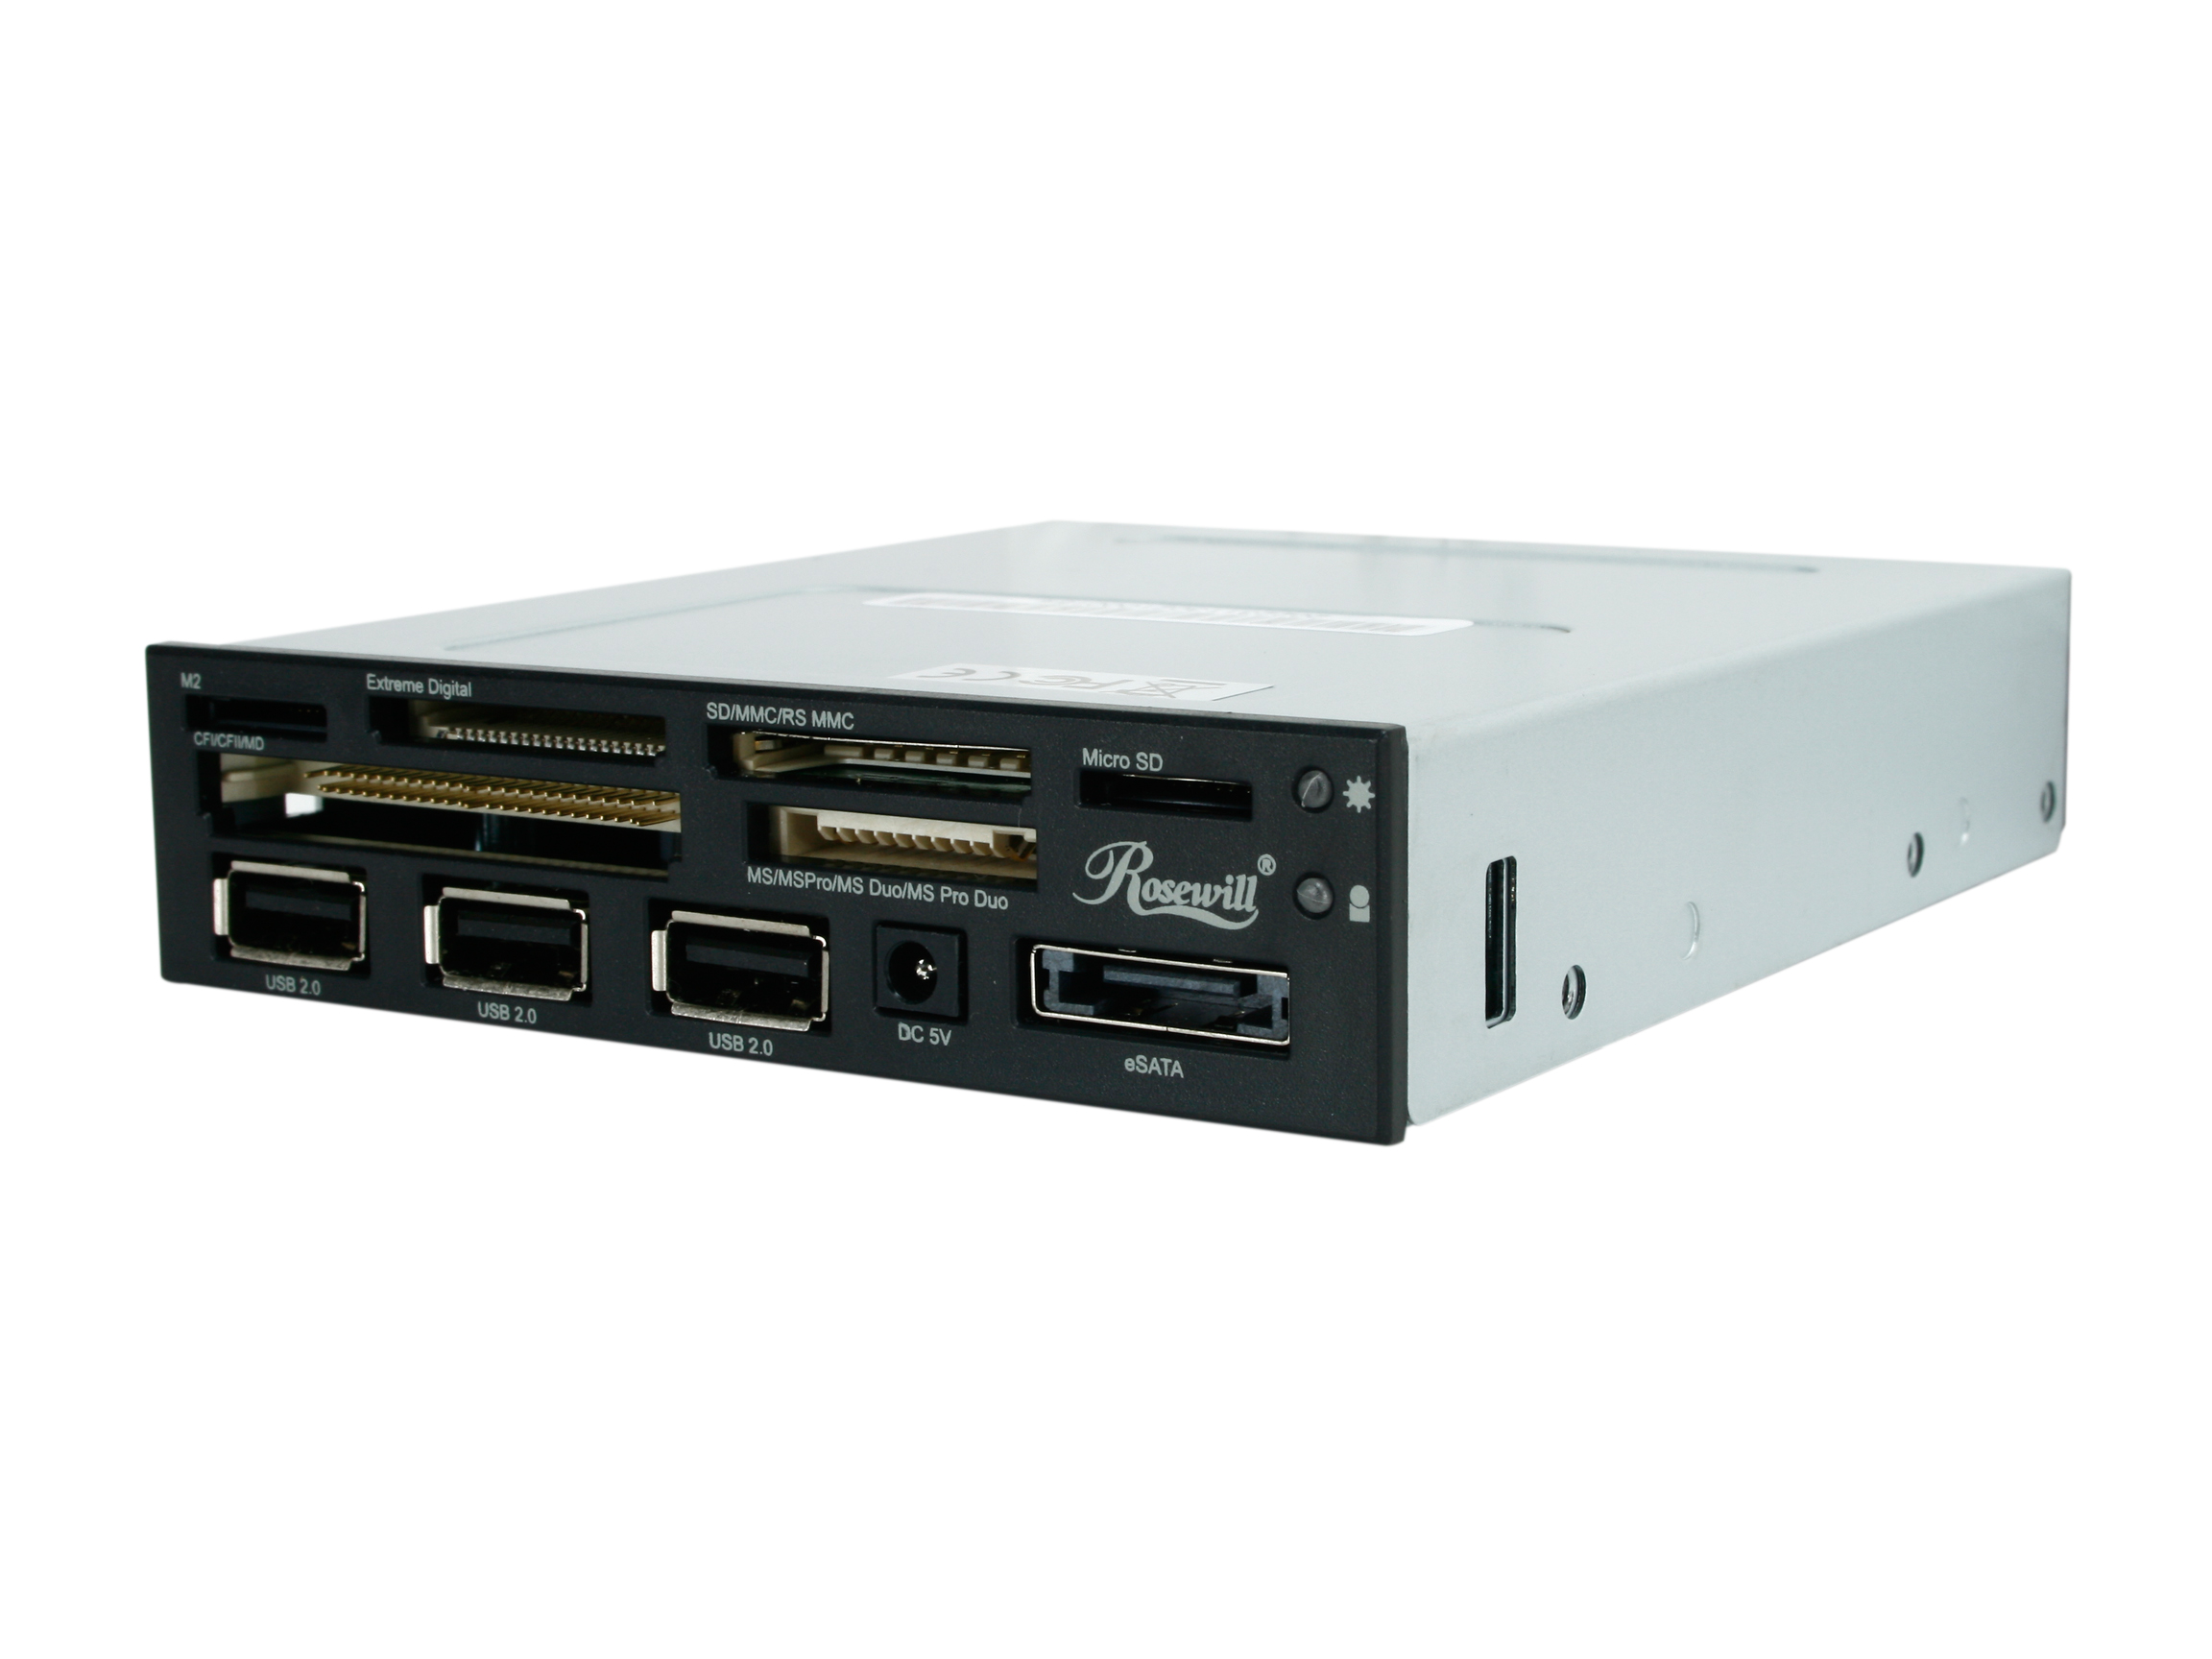 Rosewill RDCR 11004   Data Hub for 5.25" Drive Bays   Two USB 3.0 Ports and Main Connector, Four USB 2.0 Ports, eSATA, Internal Multiple Card Reader